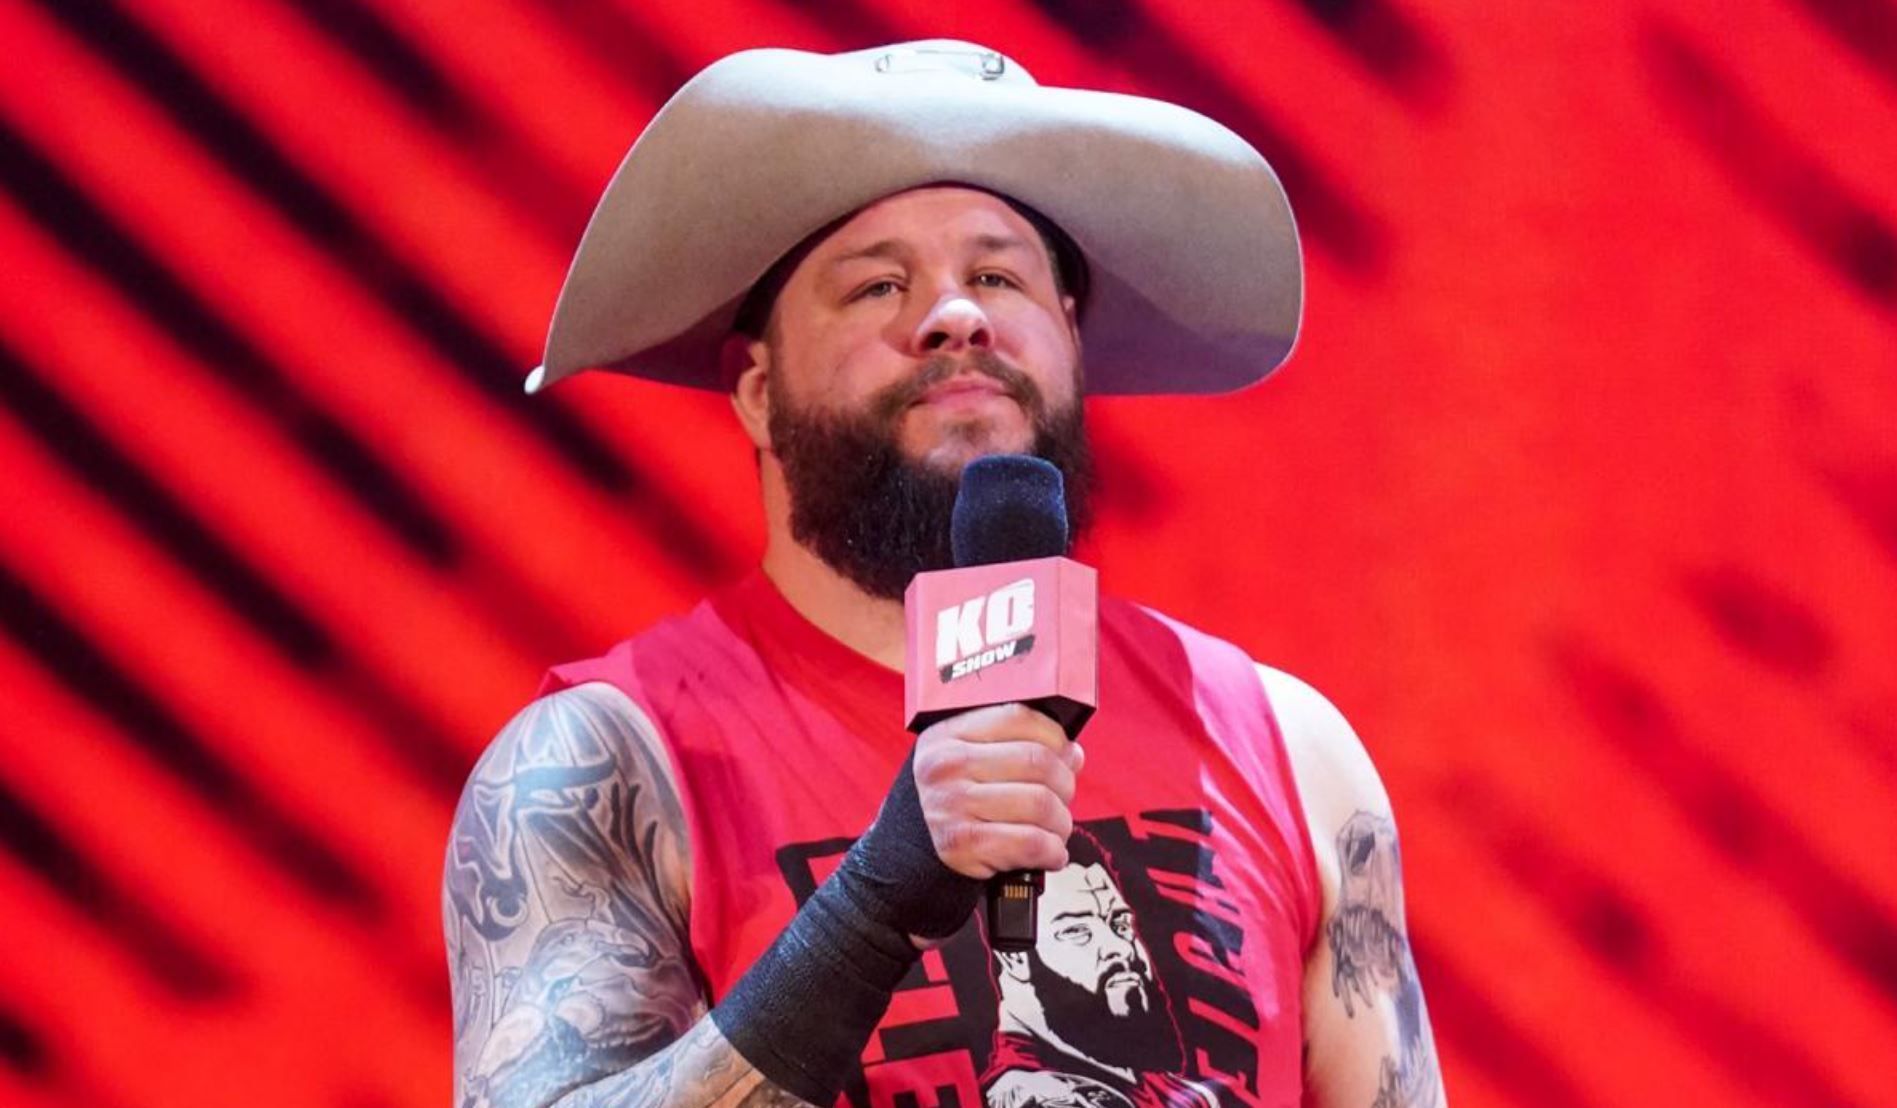 Kevin Owens hosted the KO Show RAW this week